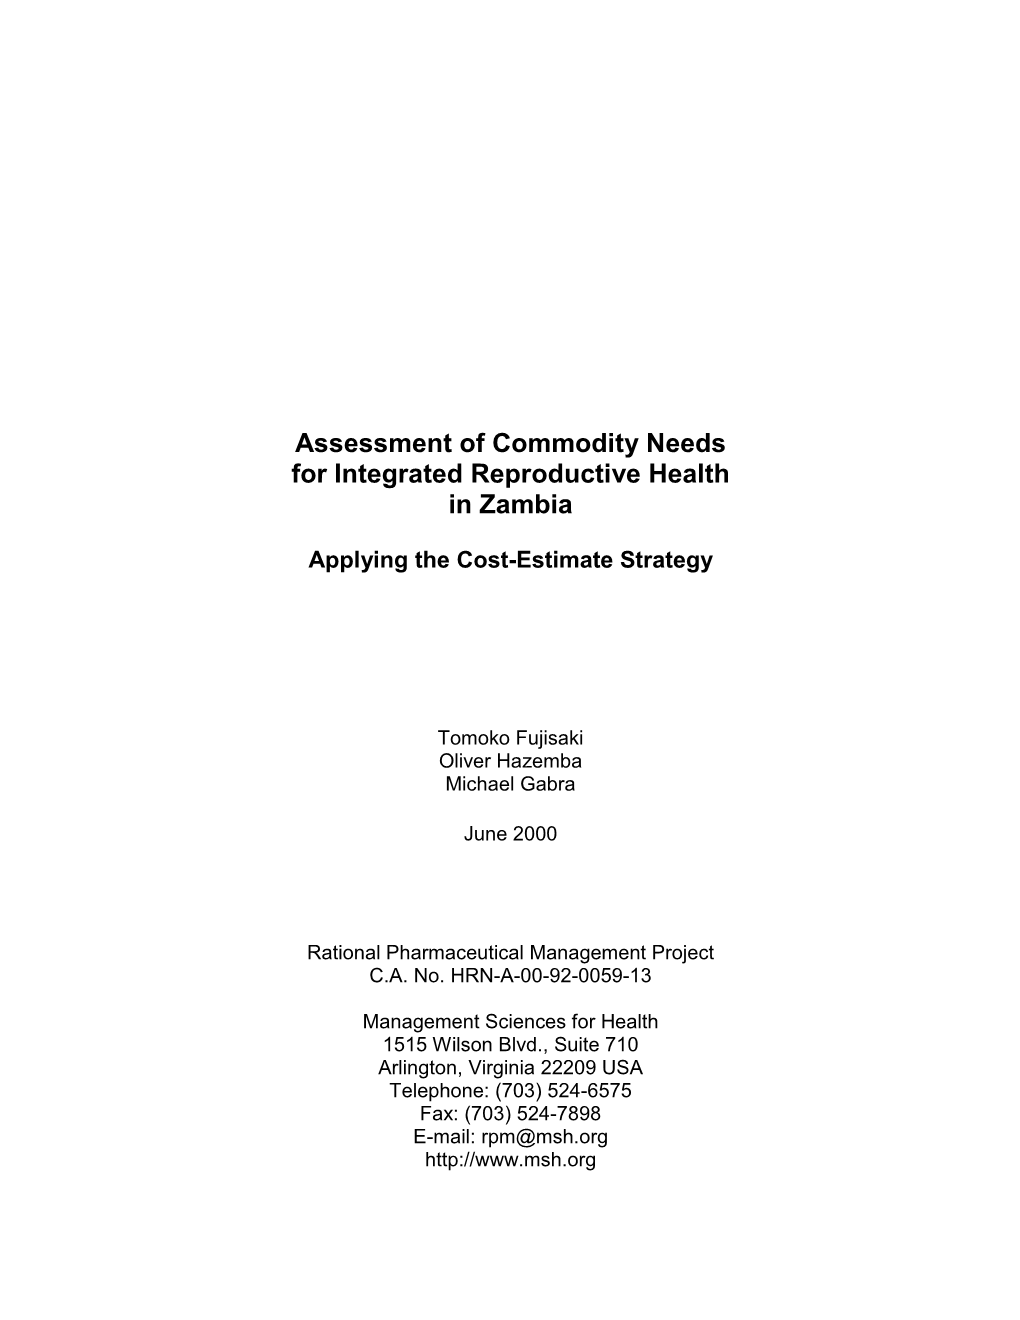 Assessment of Commodity Needs for Integrated Reproductive Health in Zambia